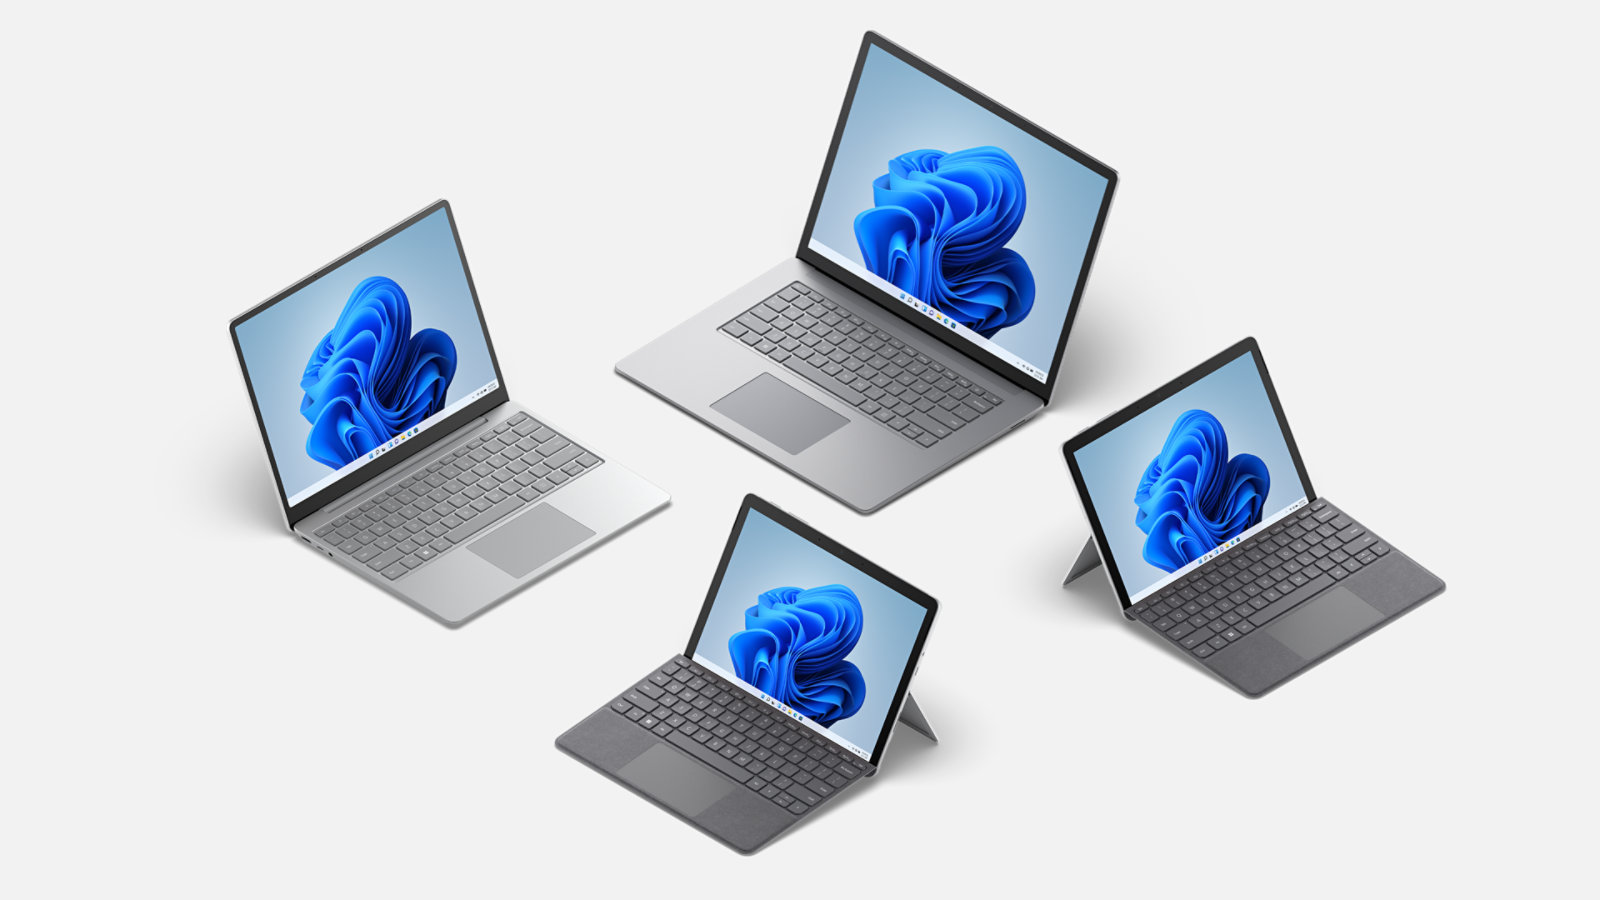 Four Surface devices.